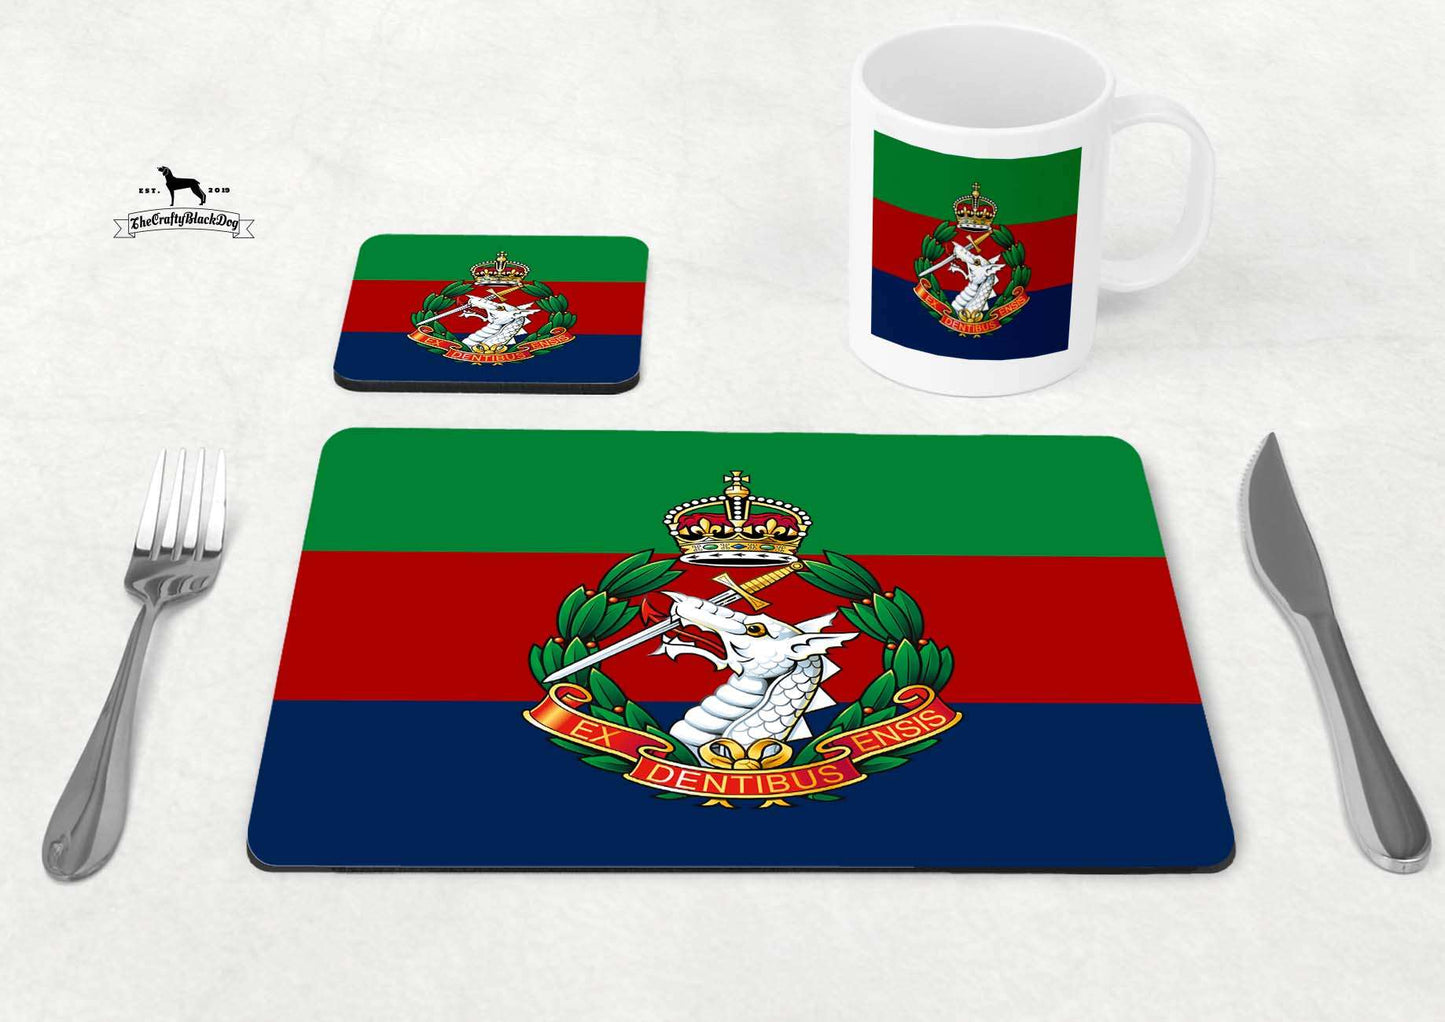 Royal Army Dental Corps - Table Set (King's New Crown)